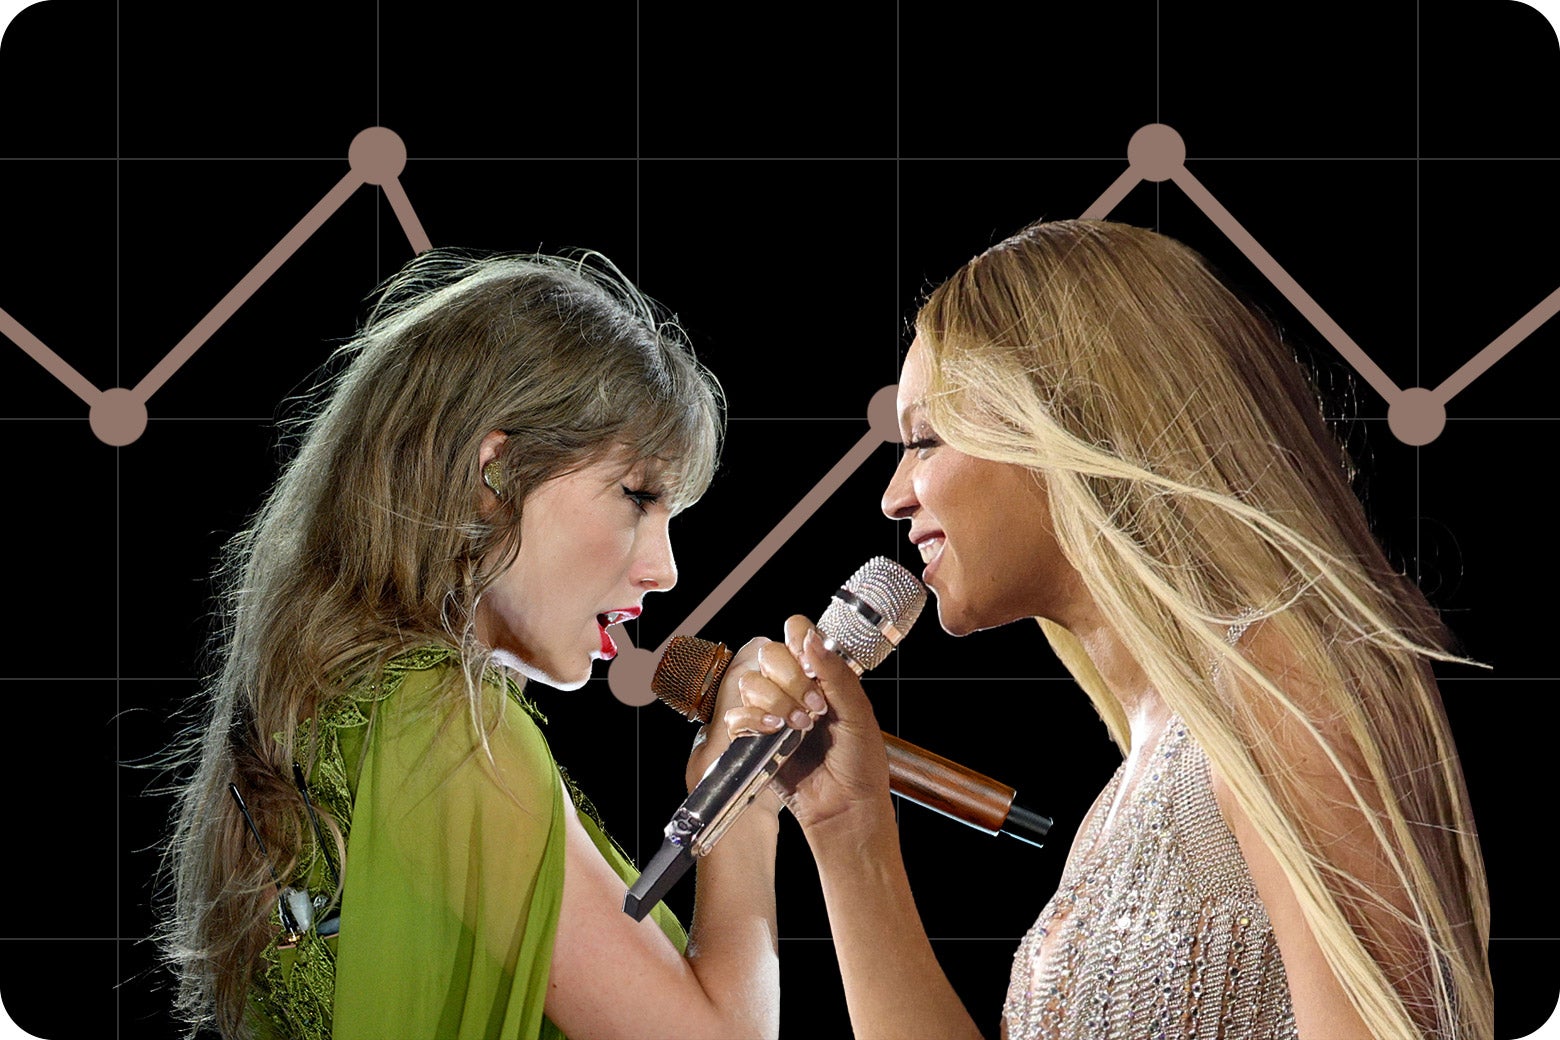 Taylor Swift and Beyoncé face off while holding microphones with line charts behind them.